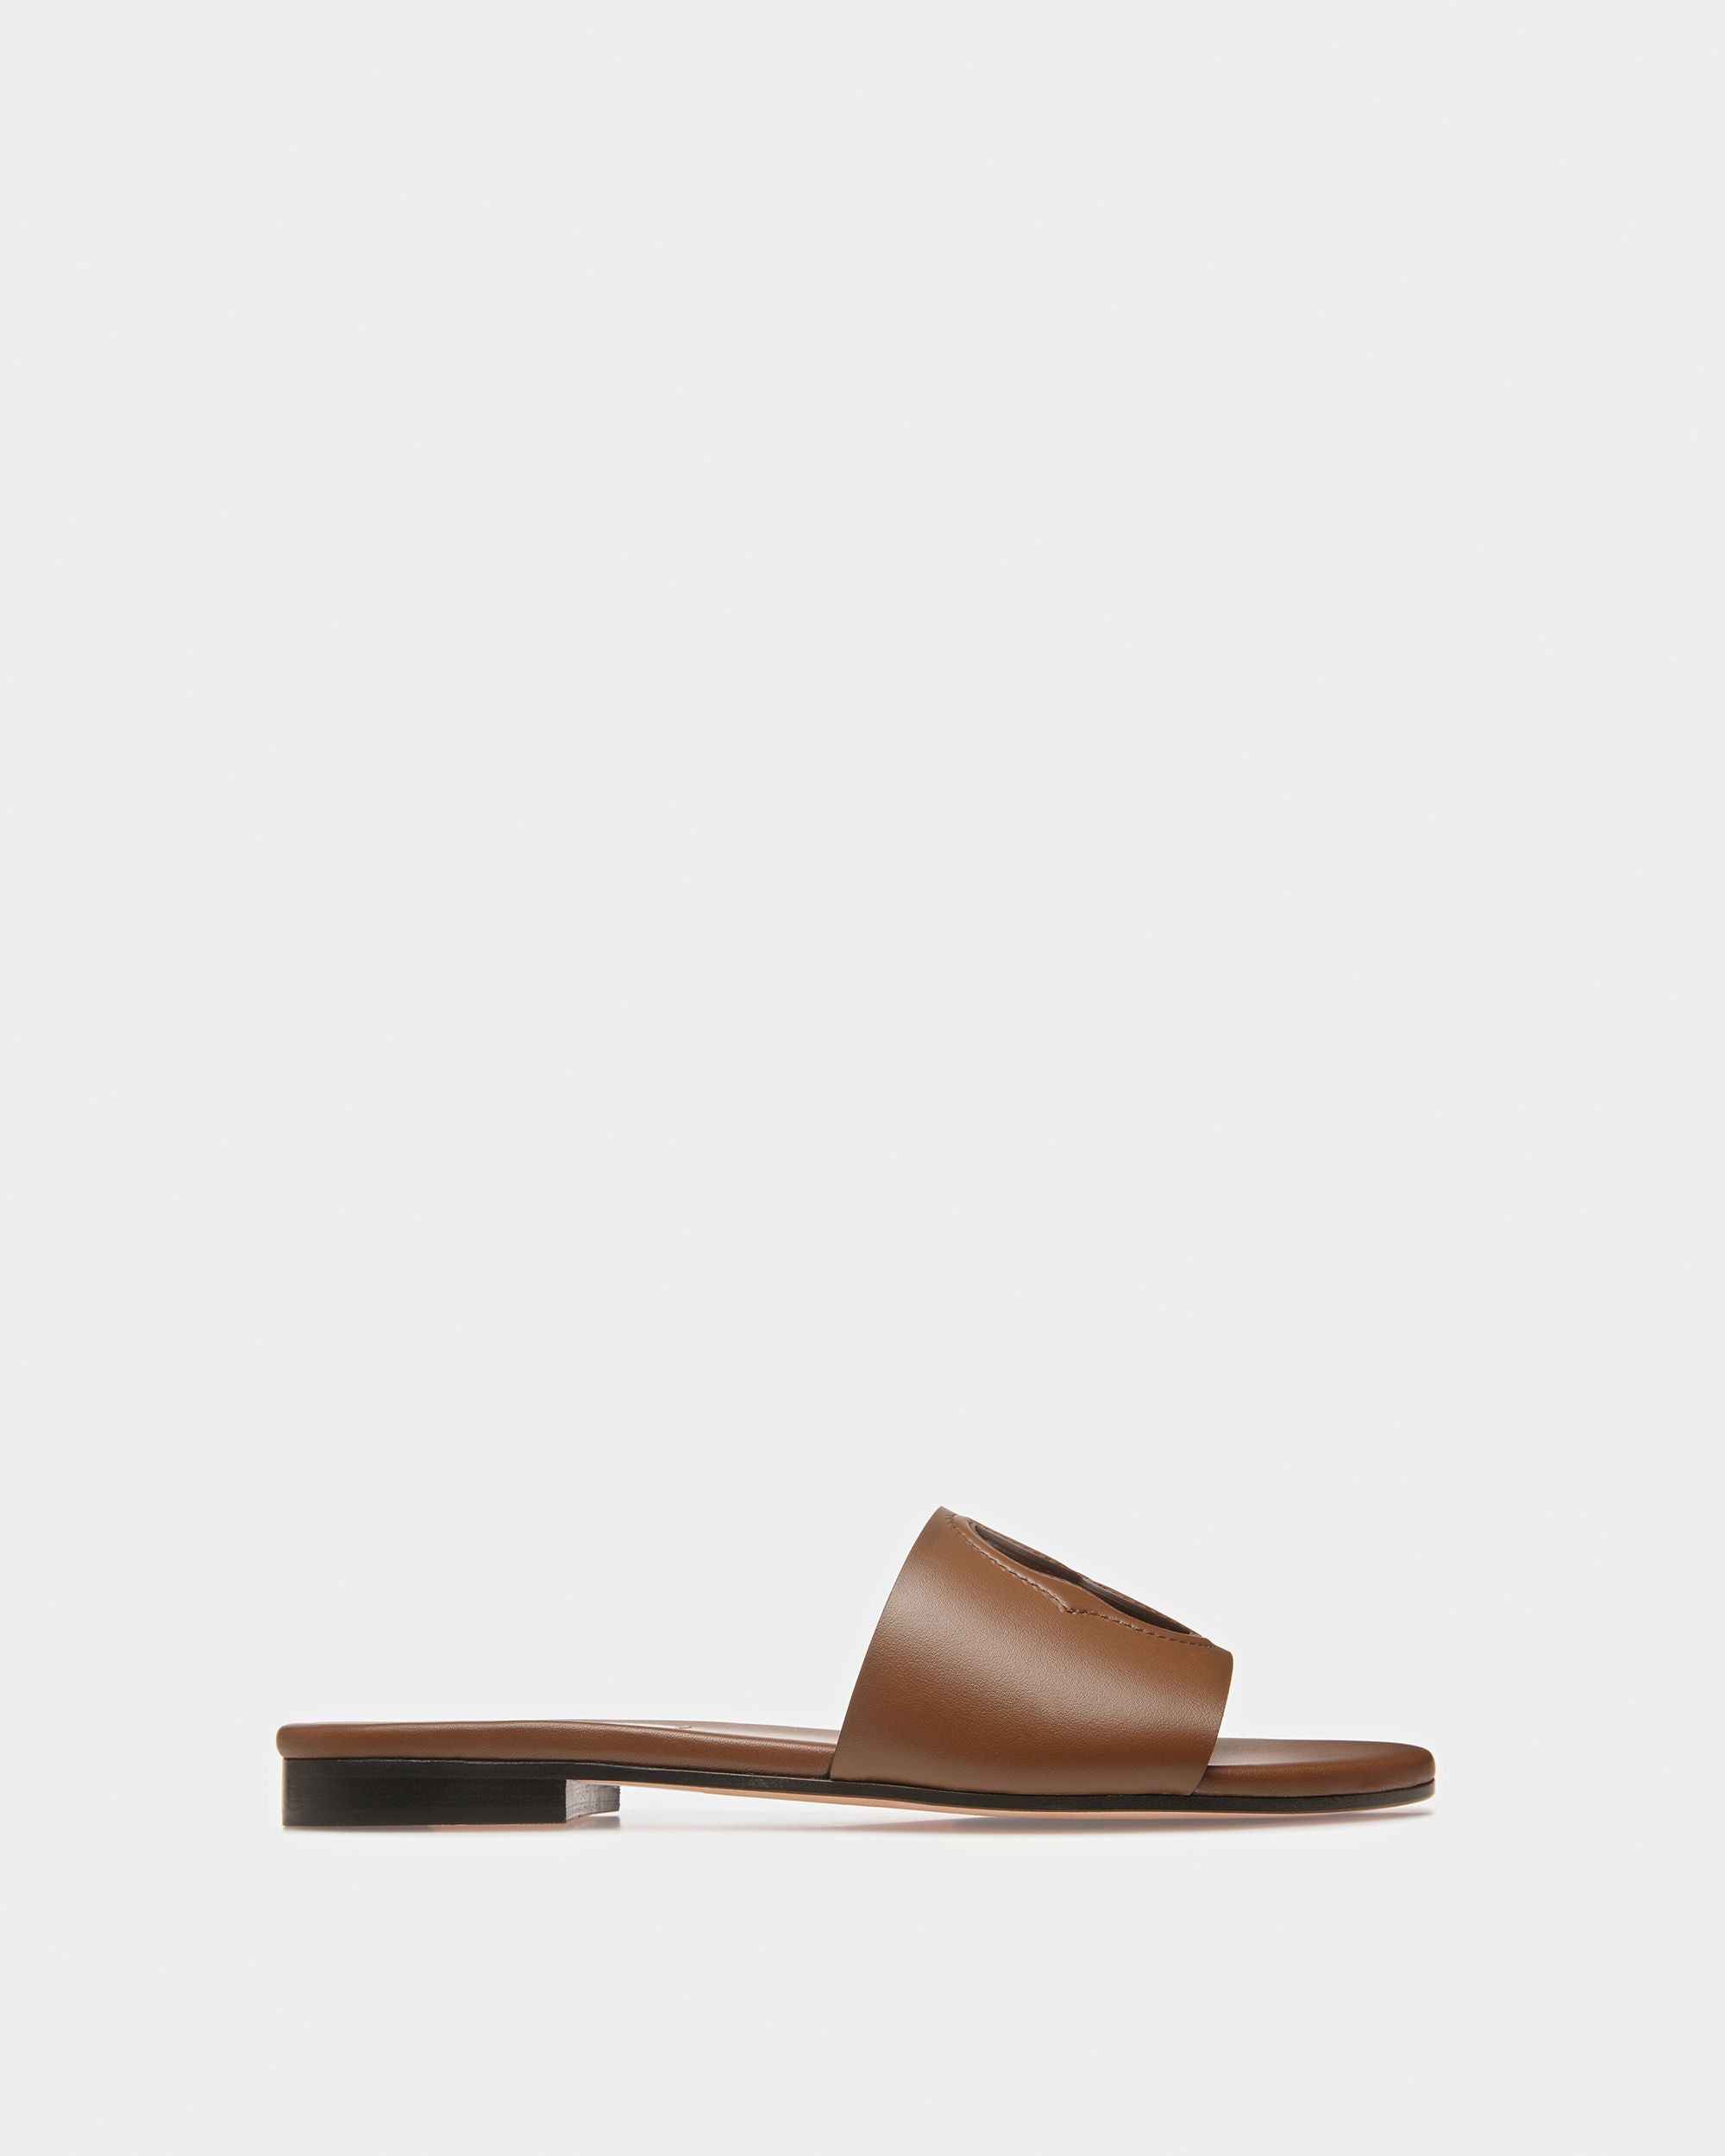 Goldie | Women's Sandals | Brown Leather | Bally | Still Life Side